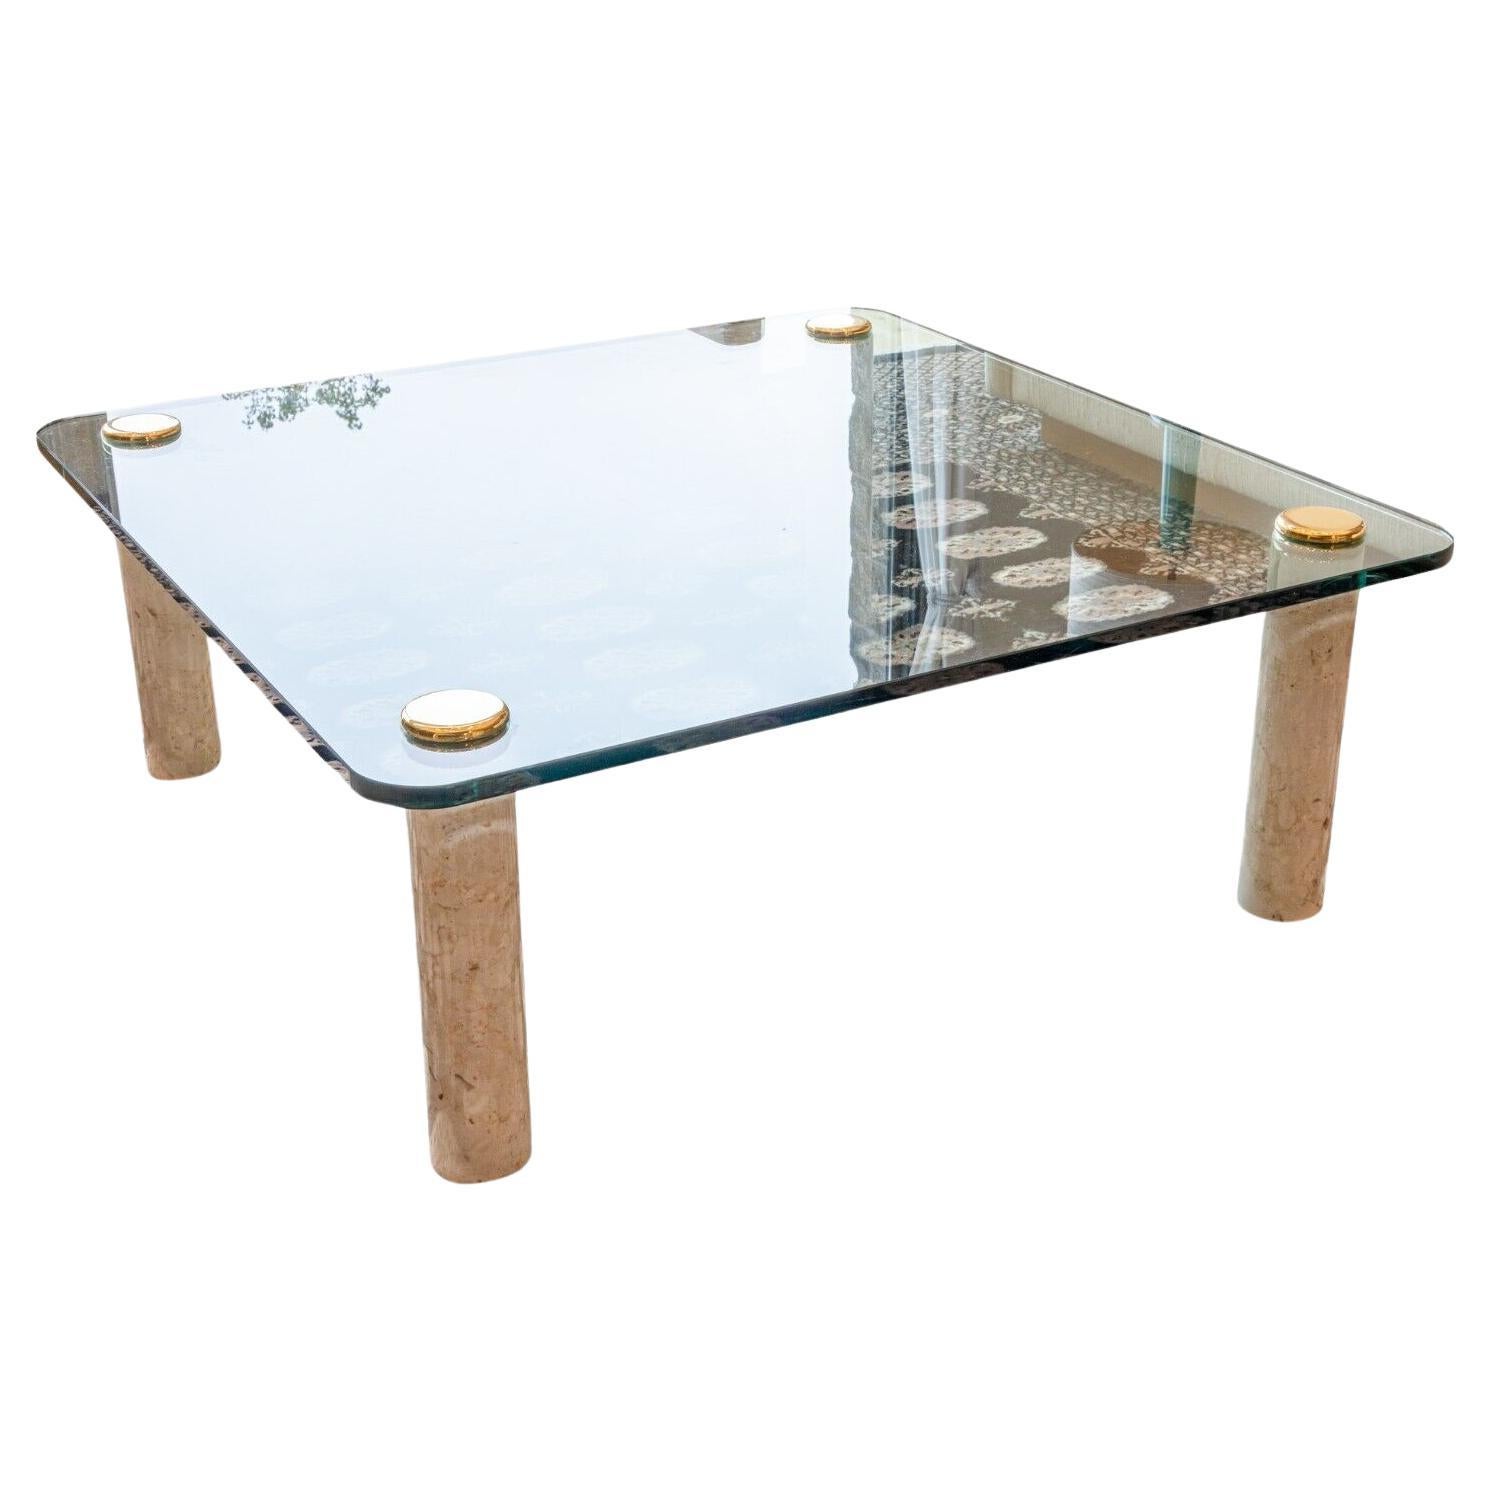 Leon Rosen for Pace Contemporary Modern Glass Marble and Brass Coffee Table (table basse contemporaine en verre, marbre et laiton)